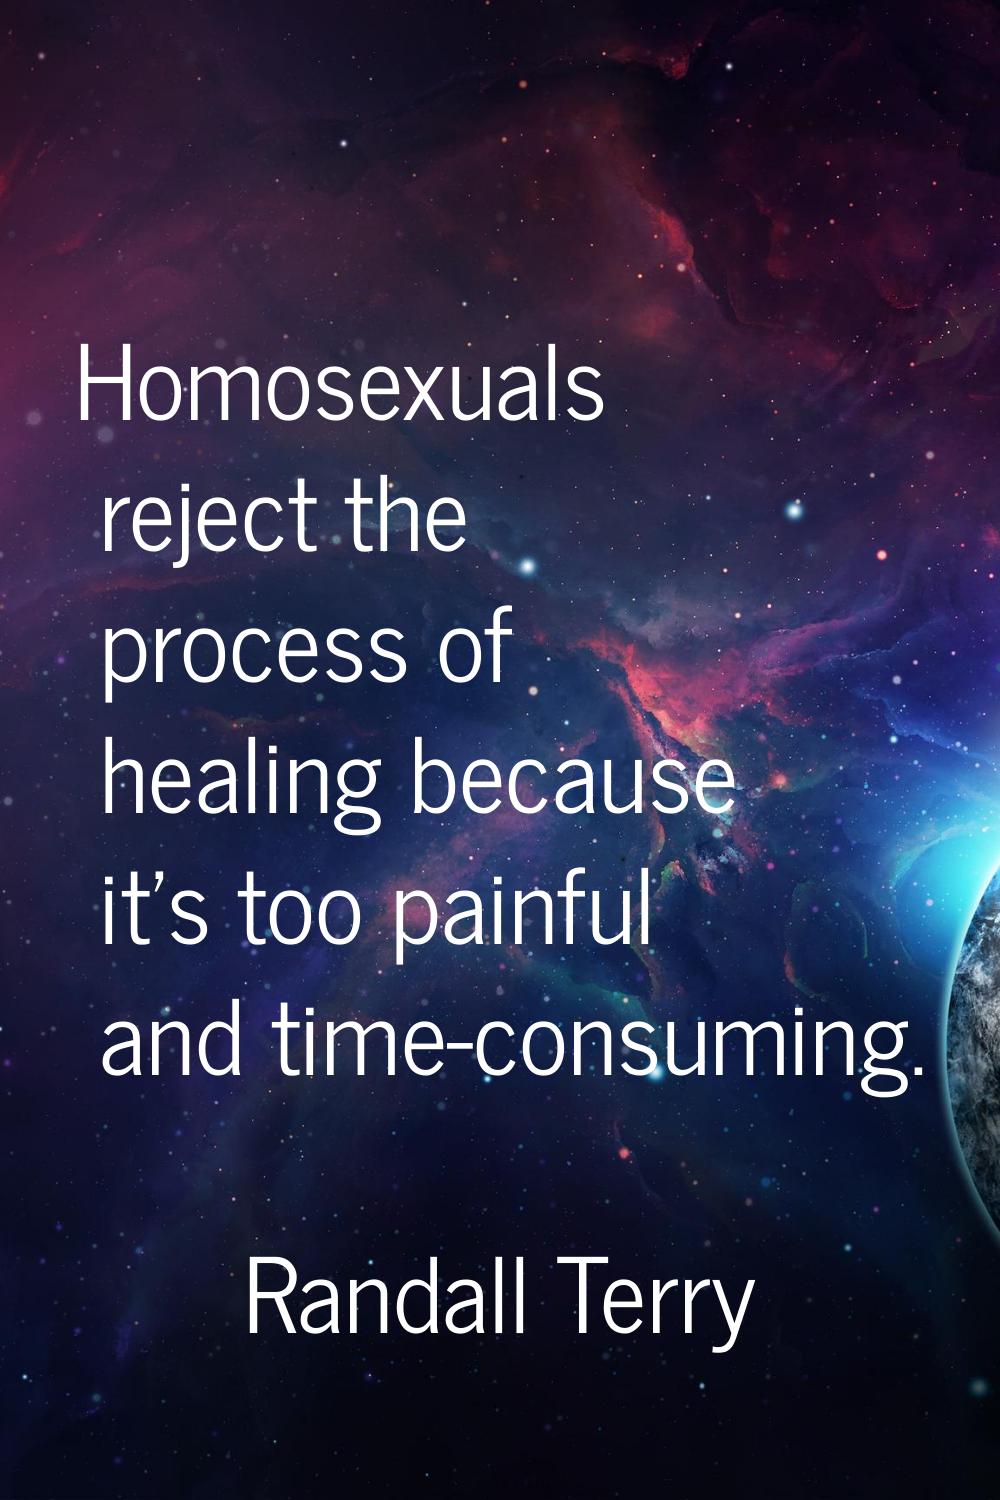 Homosexuals reject the process of healing because it's too painful and time-consuming.